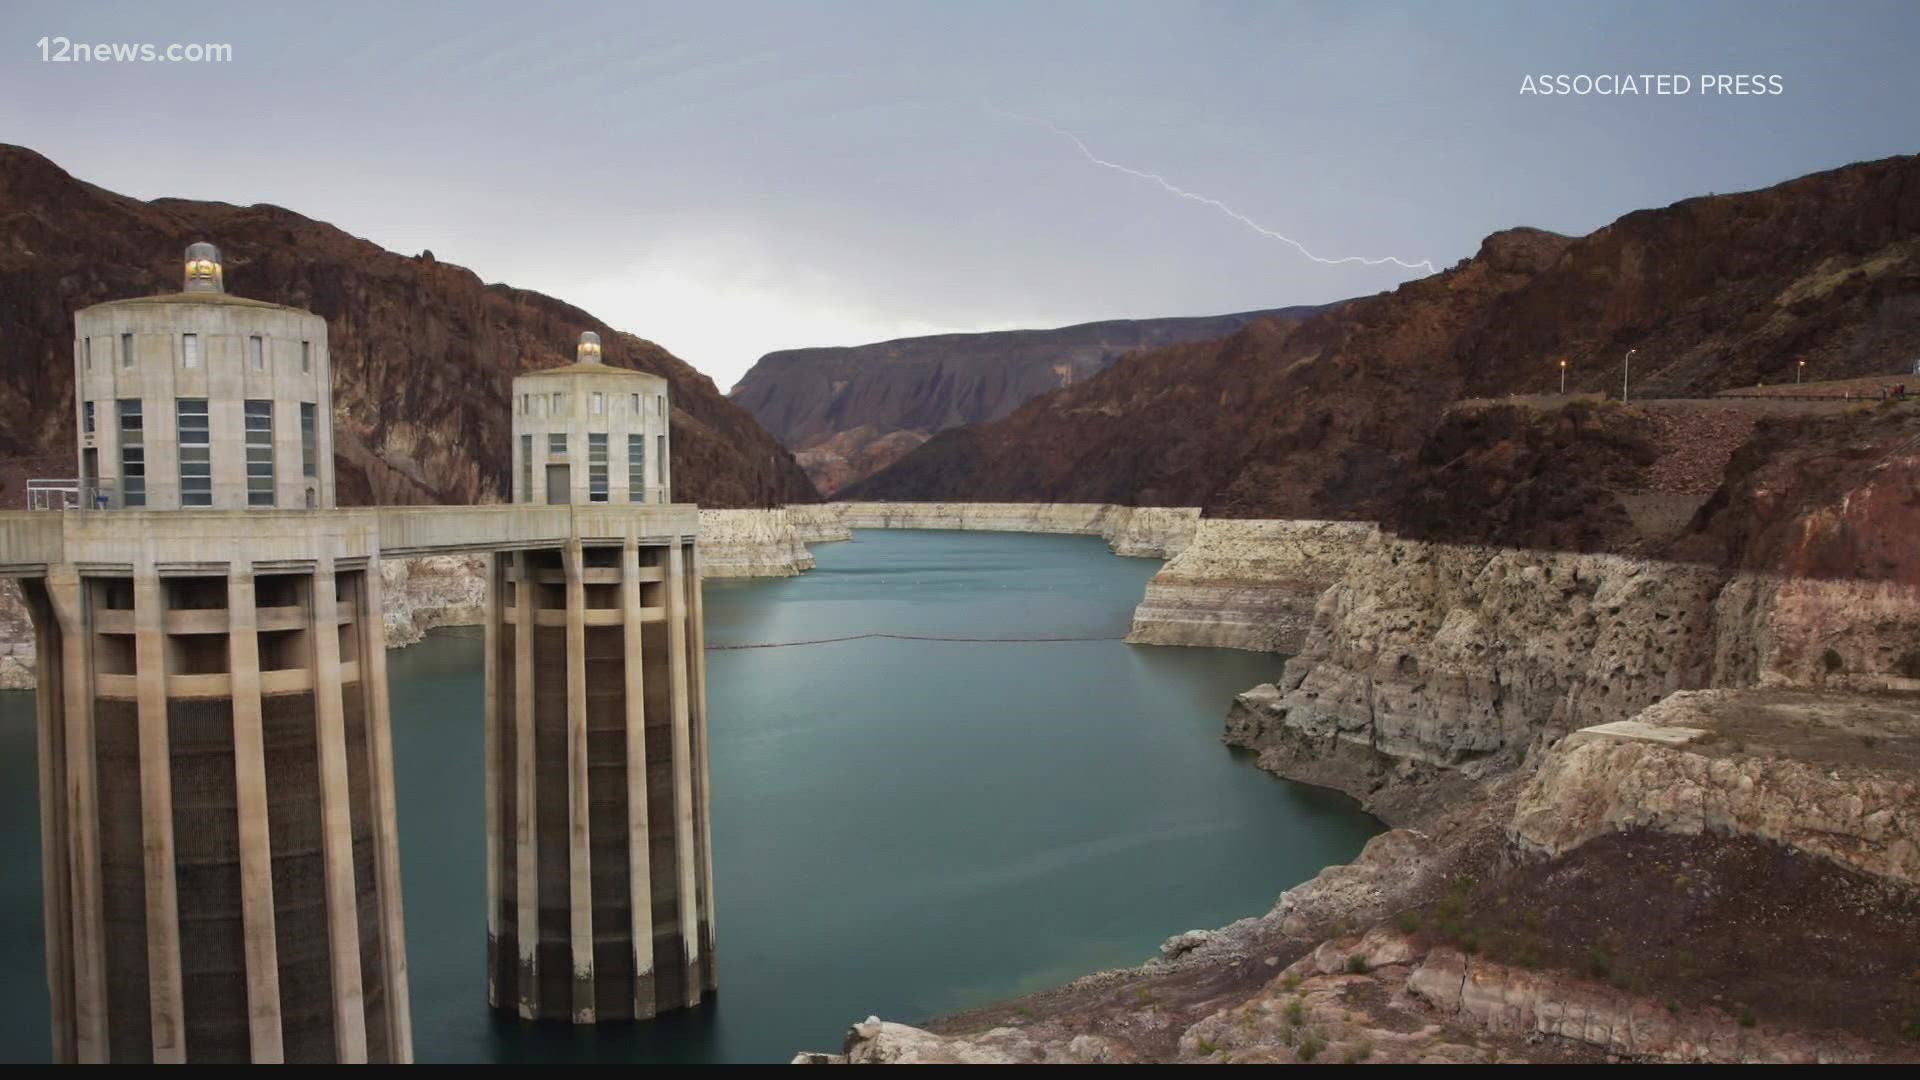 The first-ever water shortage was declared on Monday for the Colorado River. The announcement means Arizona will get 18% less water from the river in 2022.